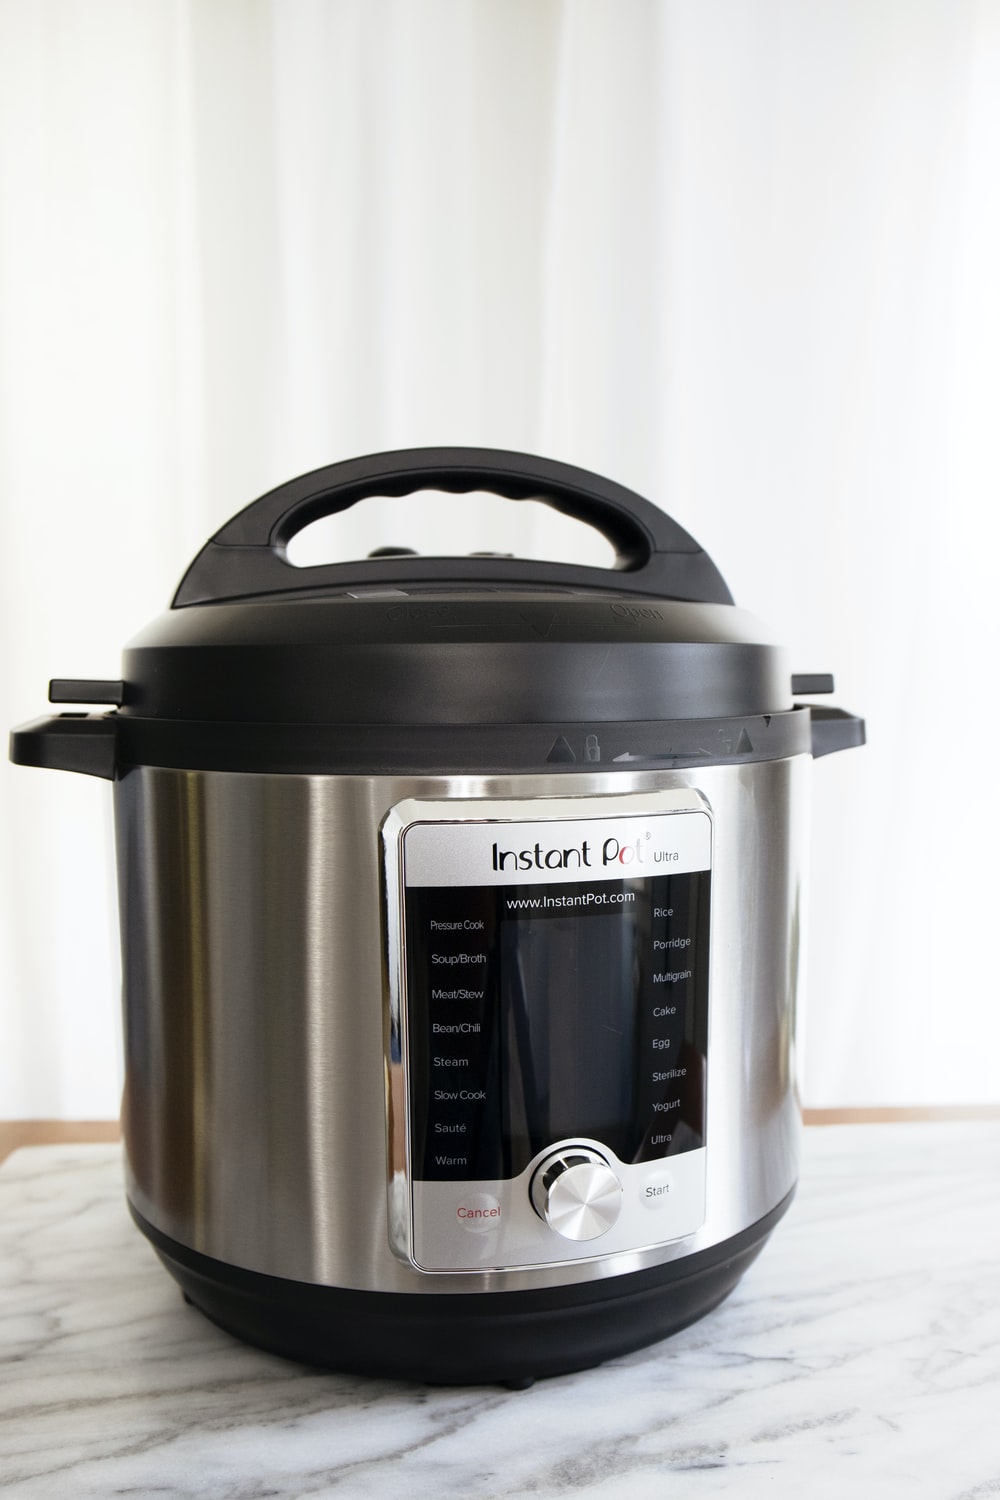 What Temperature Does a Slow Cooker Cook At?